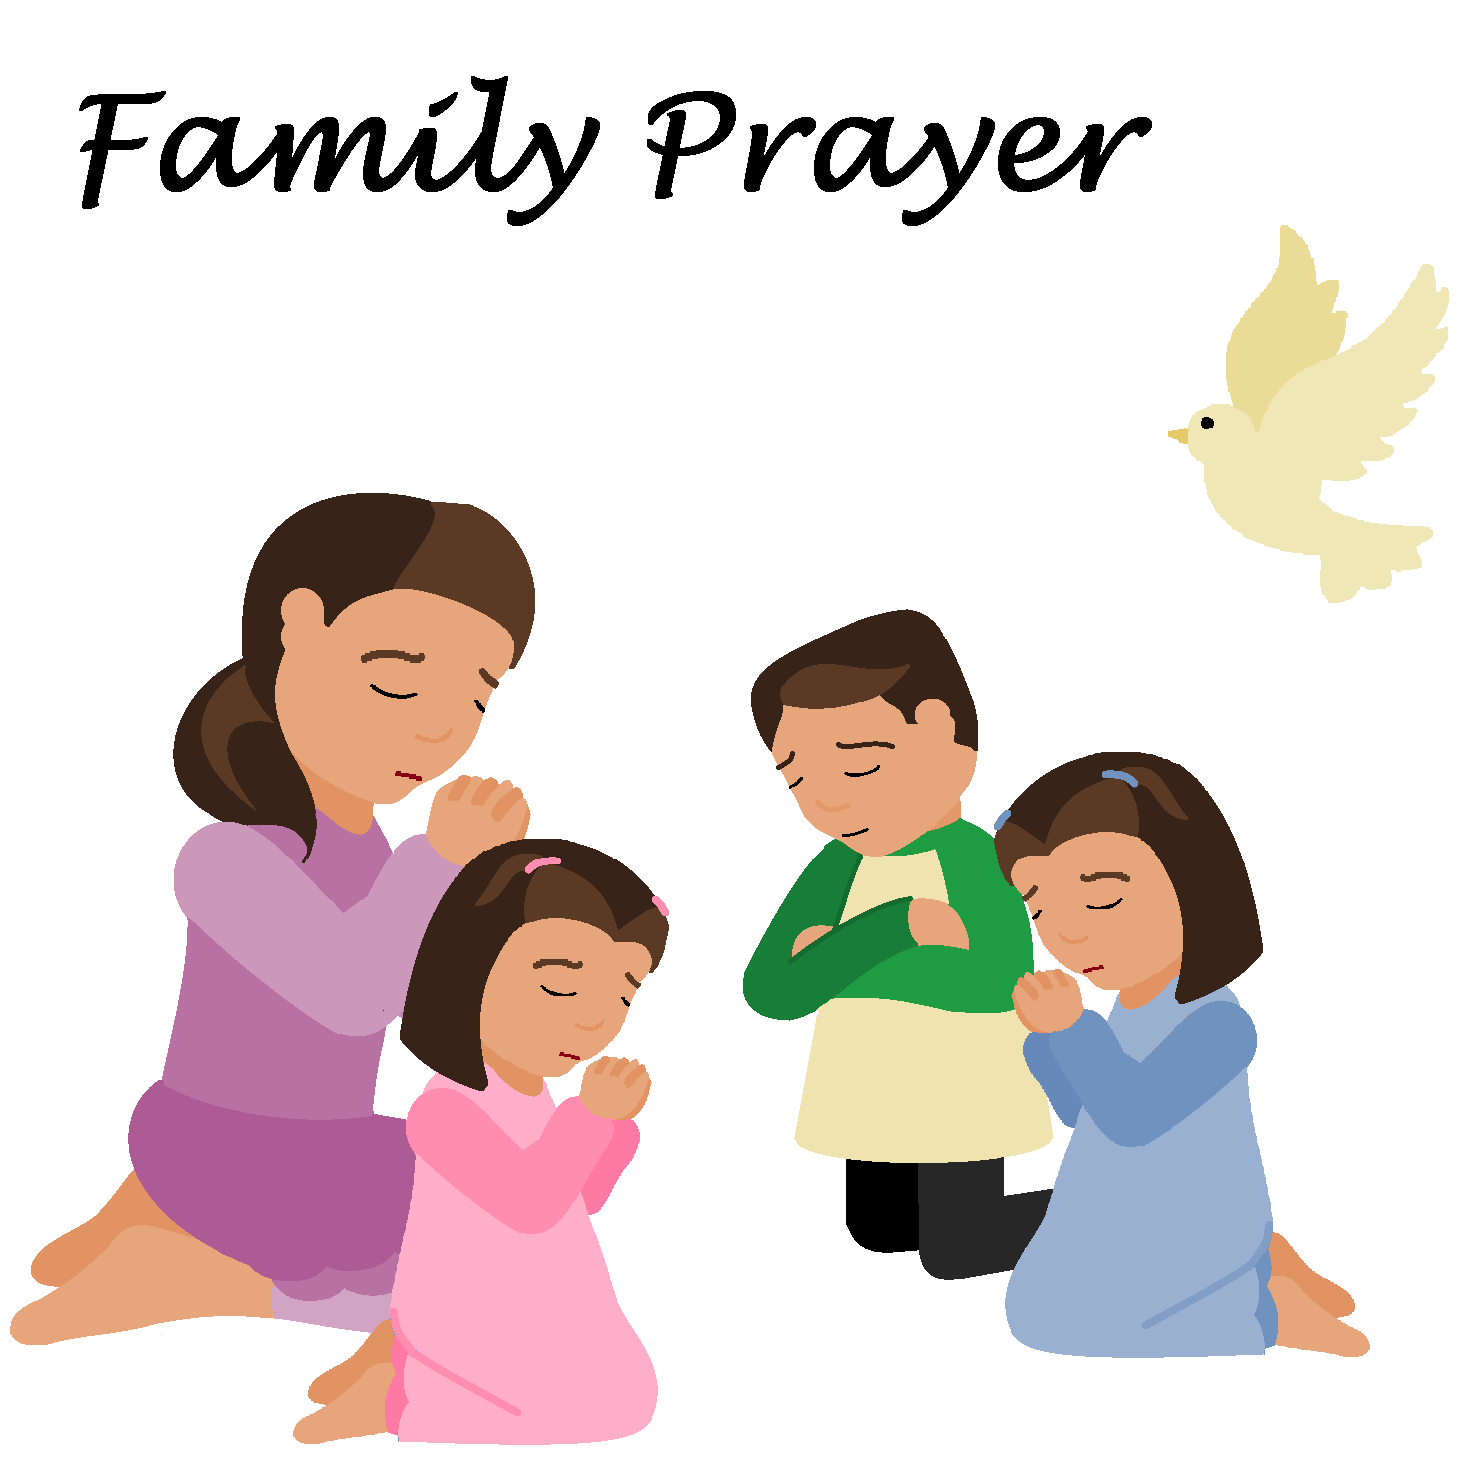 His Little Spark In The Dark: Importance of Family Prayer